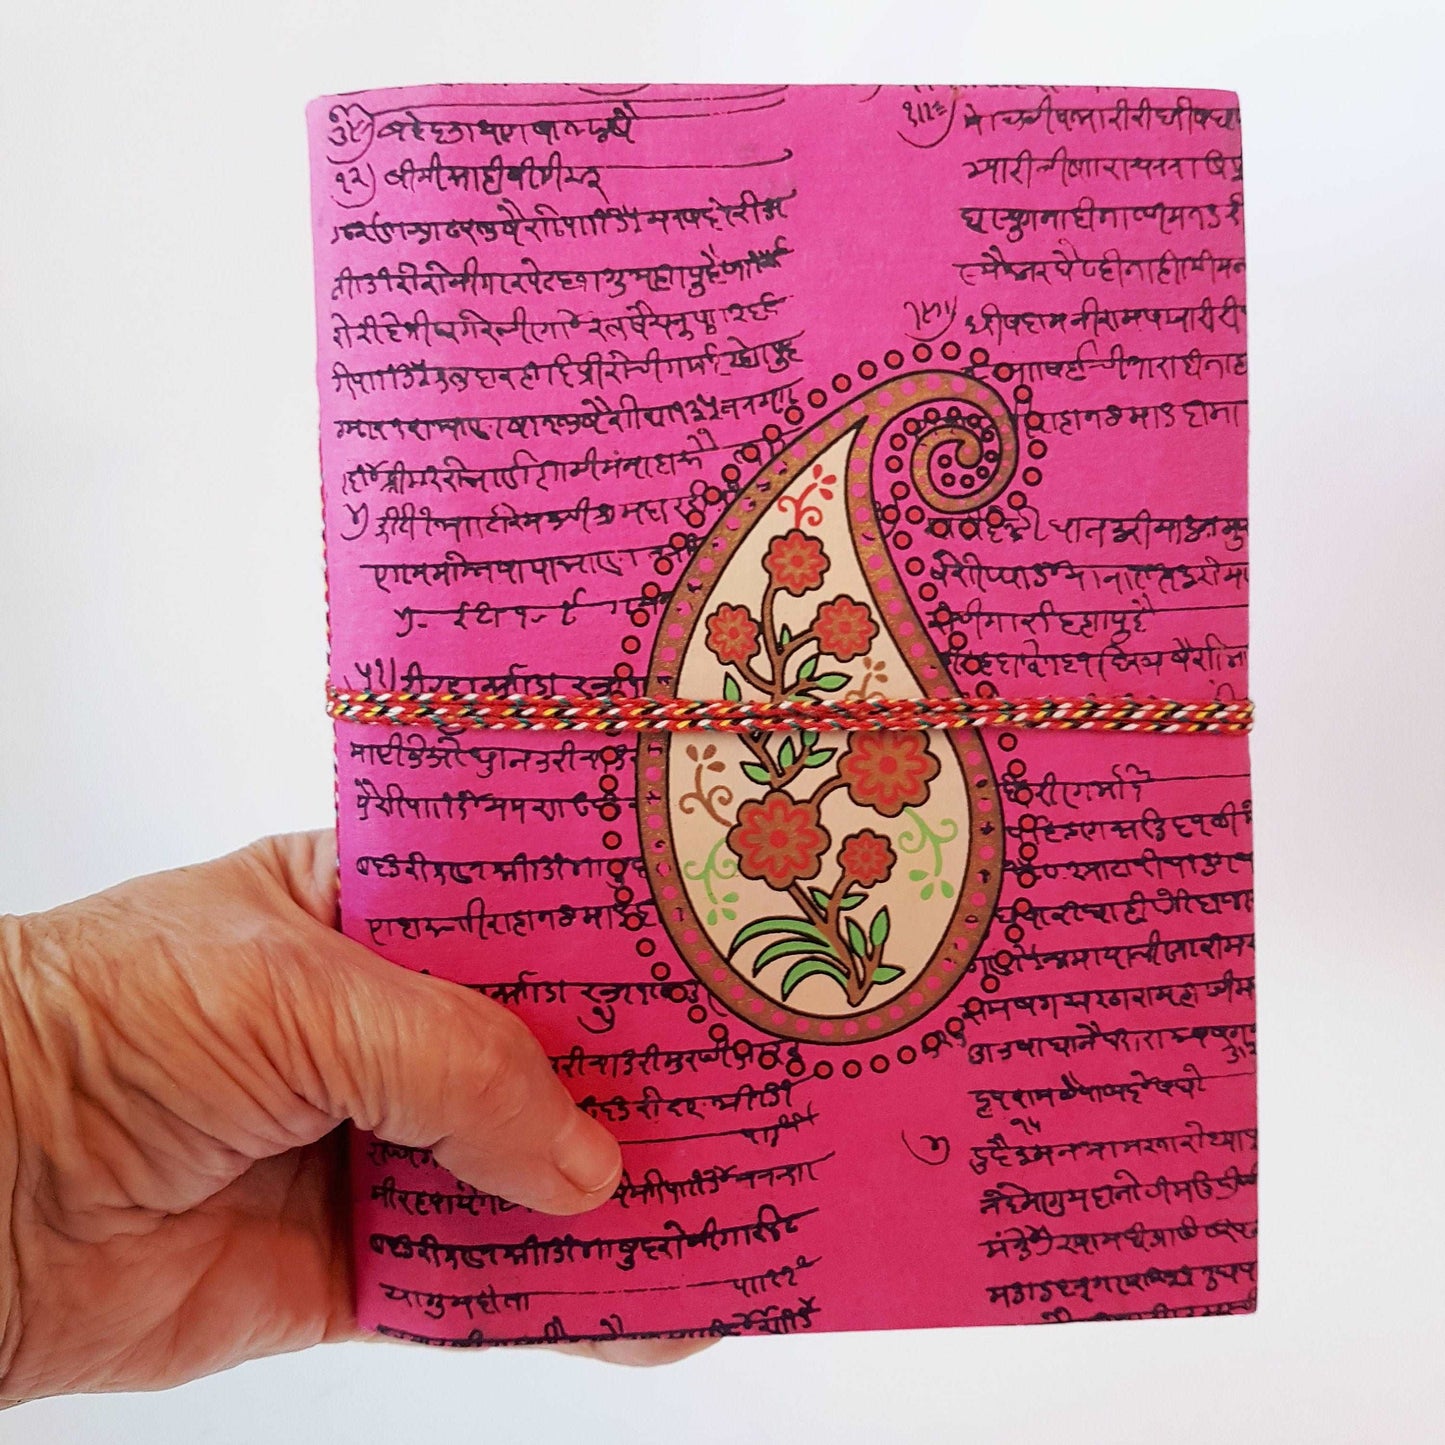 Blank notebook with fuscia pink floral paisley design cover 6x8 inch. Use as sketchbook, bullet journal, diary. Premium handmade paper. - Vintage India Ca